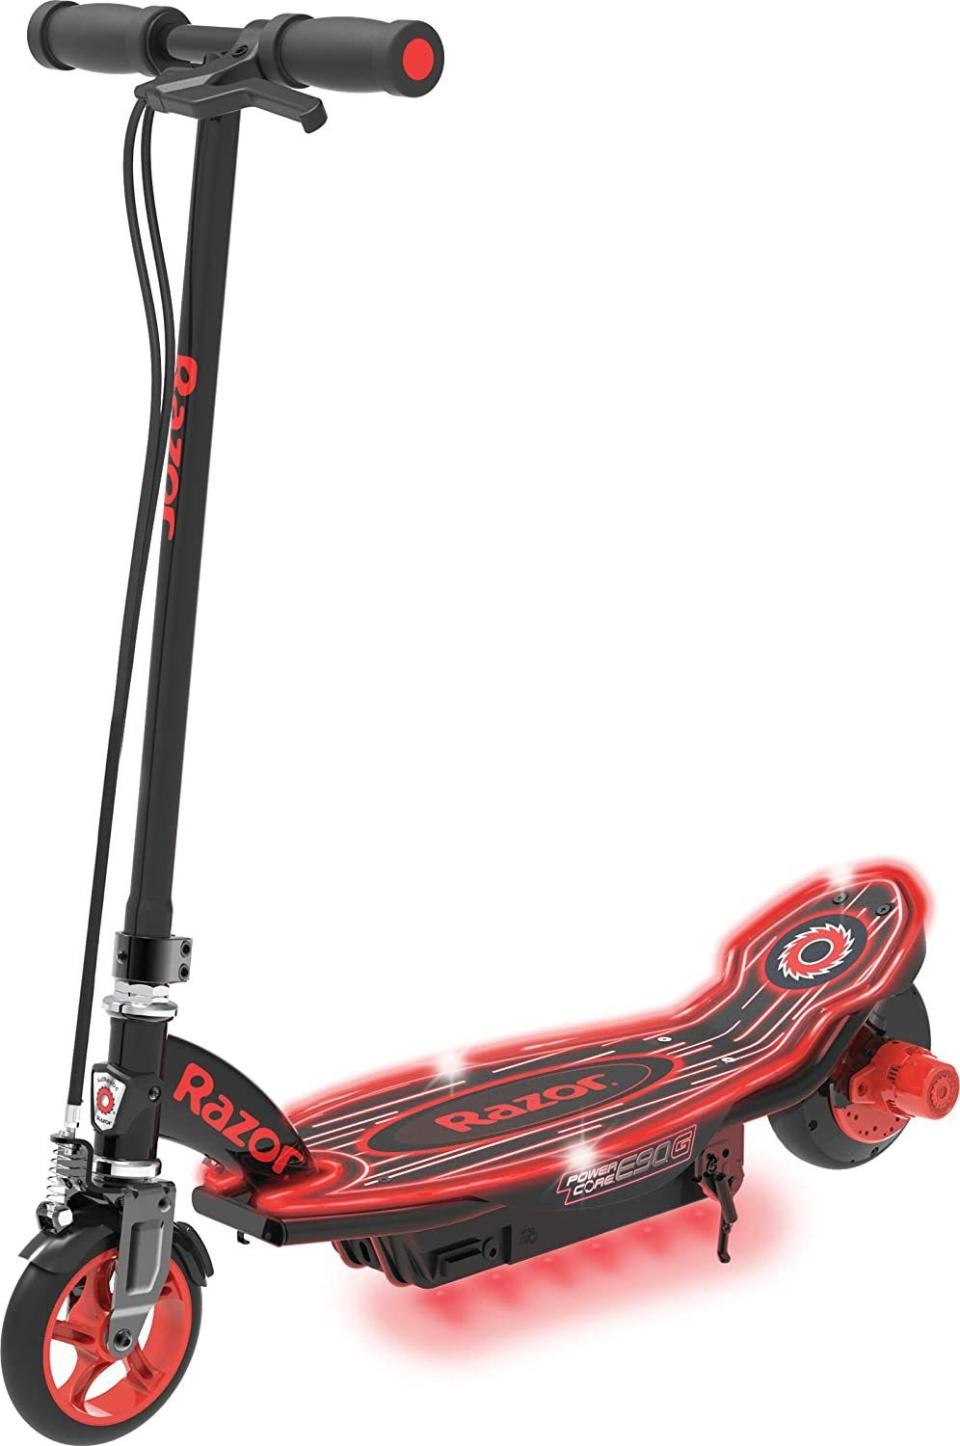 29) Razor Power Core E90 Glow Electric Scooter for Kids Ages 8+ - 90w Hub Motor, LED Light-Up Deck, Up to 10 mph and 60 min Ride Time, For Riders up to 120 lbs